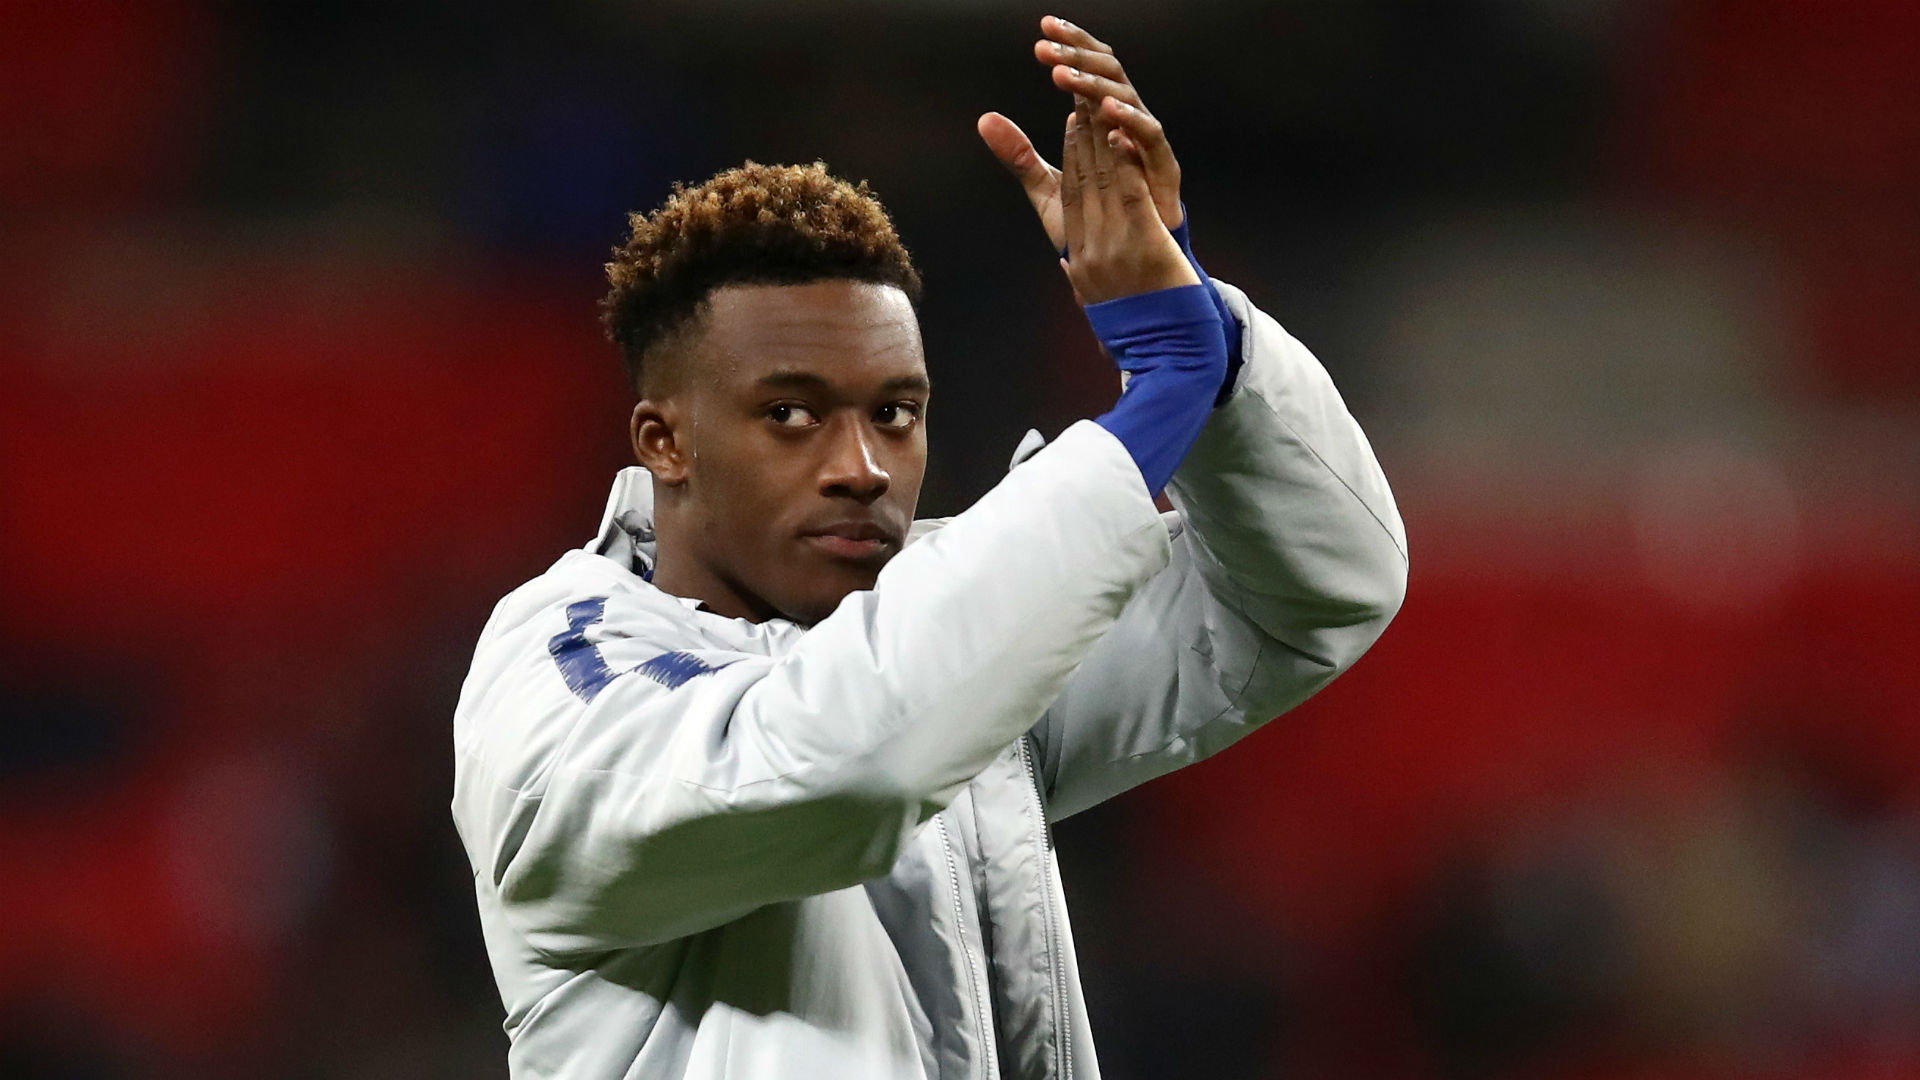 Chelsea winger Callum Hudson-Odoi has attracted the interest of Bayern Munich, who claim to be in talks with the English club.